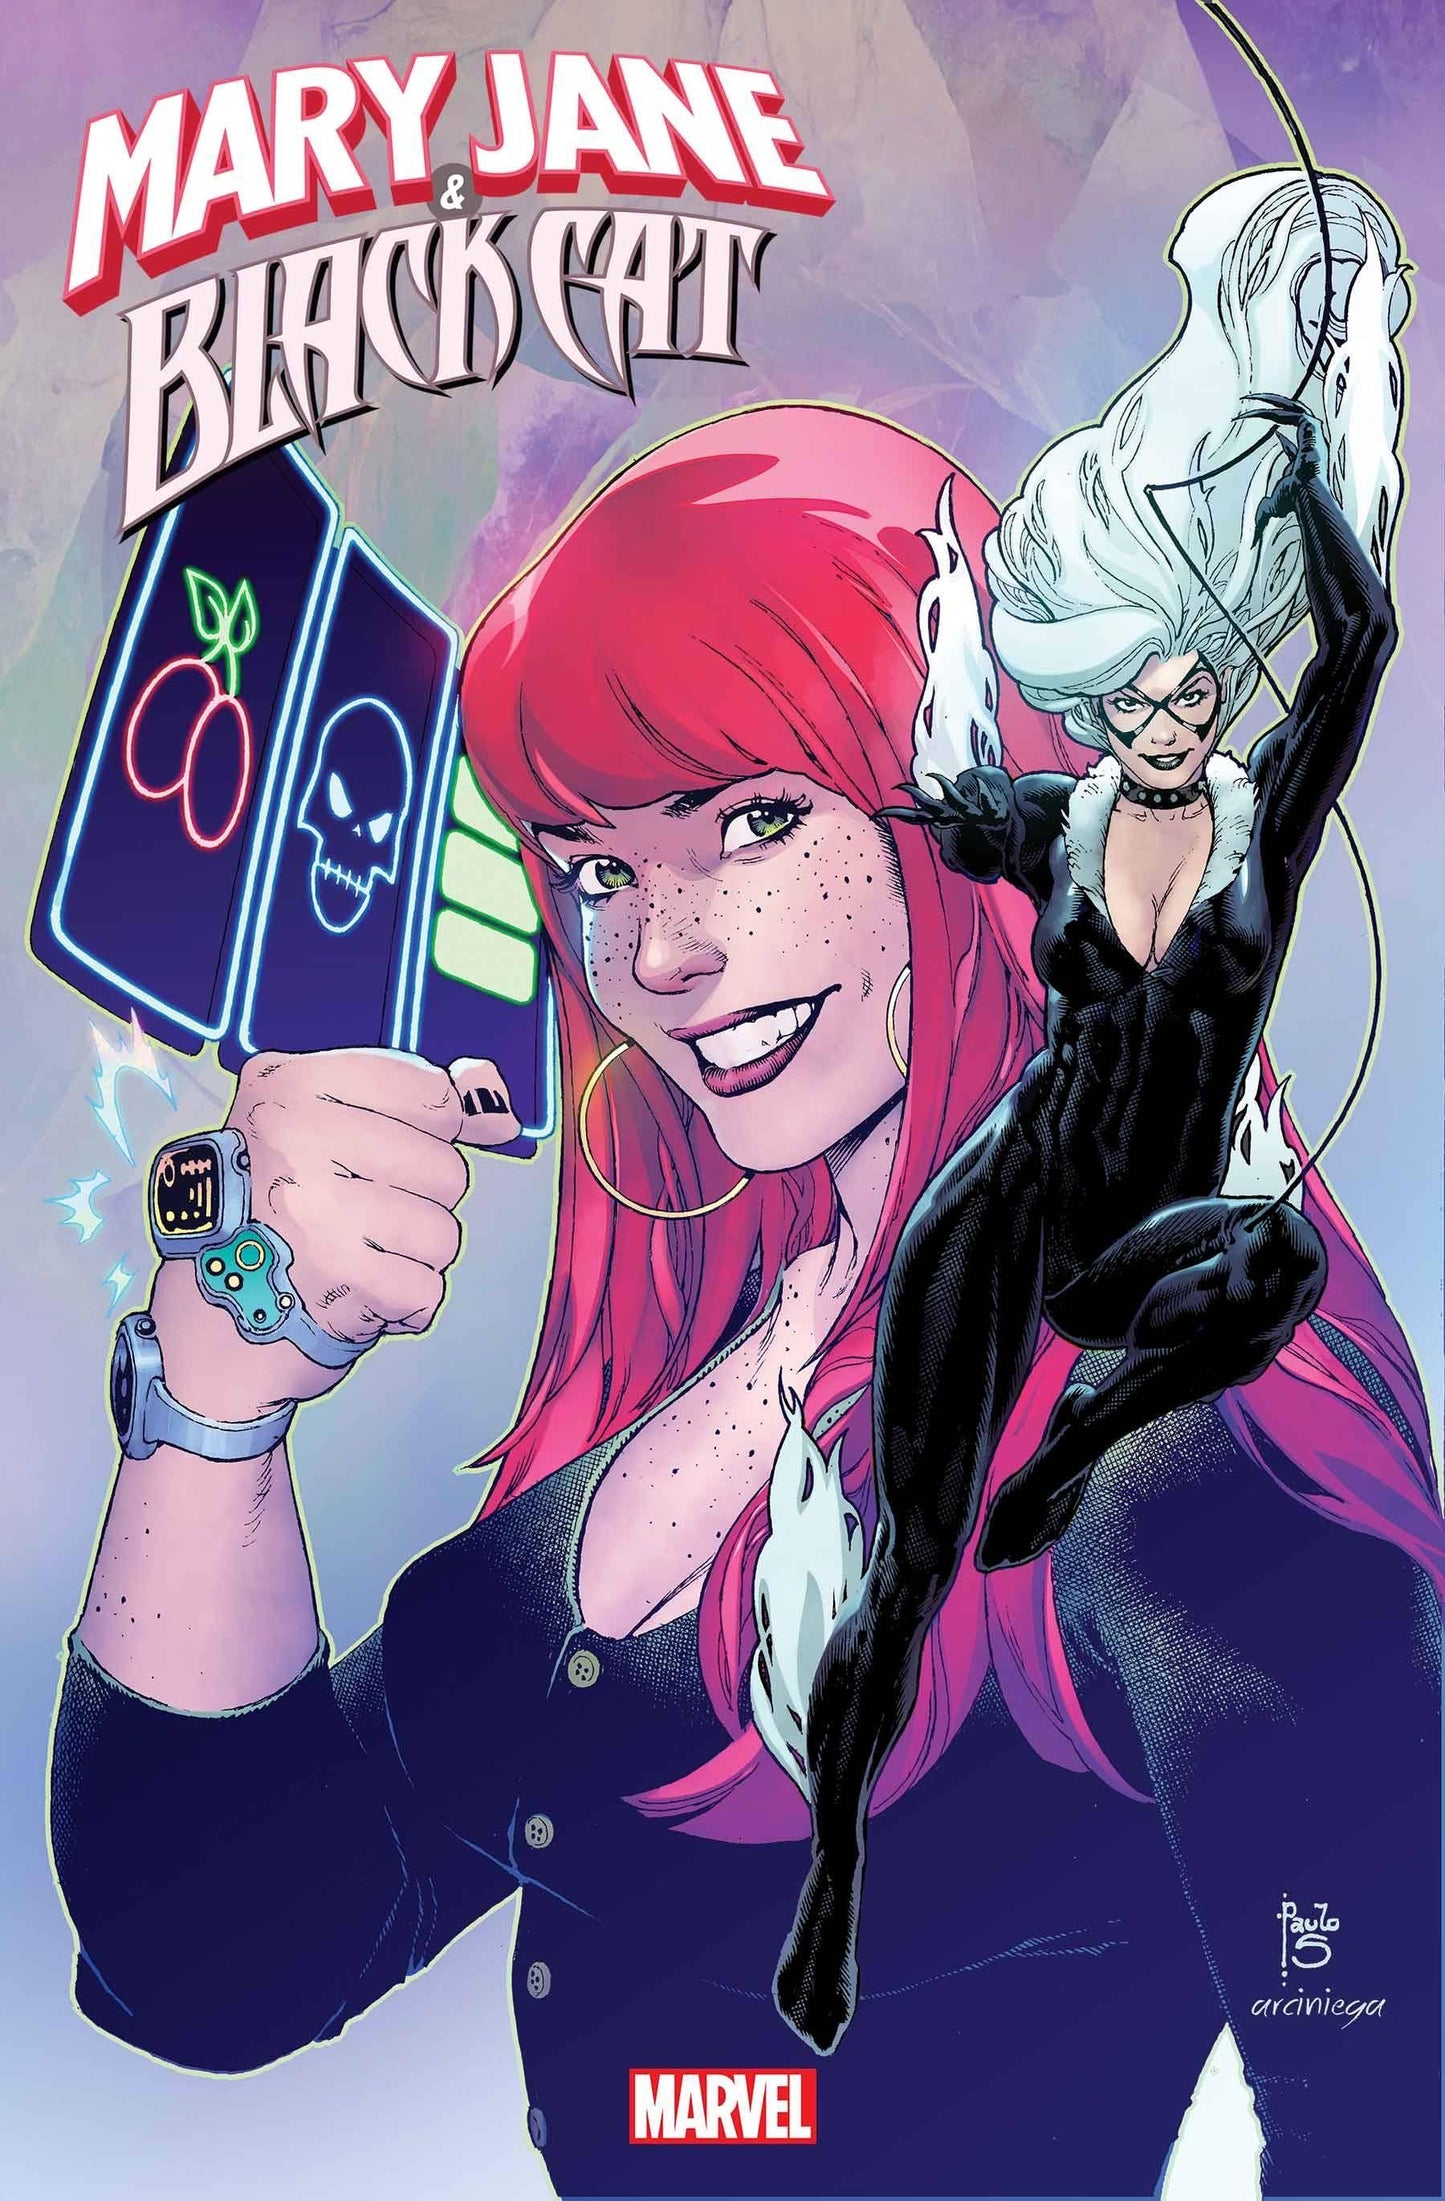 MARY JANE AND BLACK CAT #5 (OF 5)